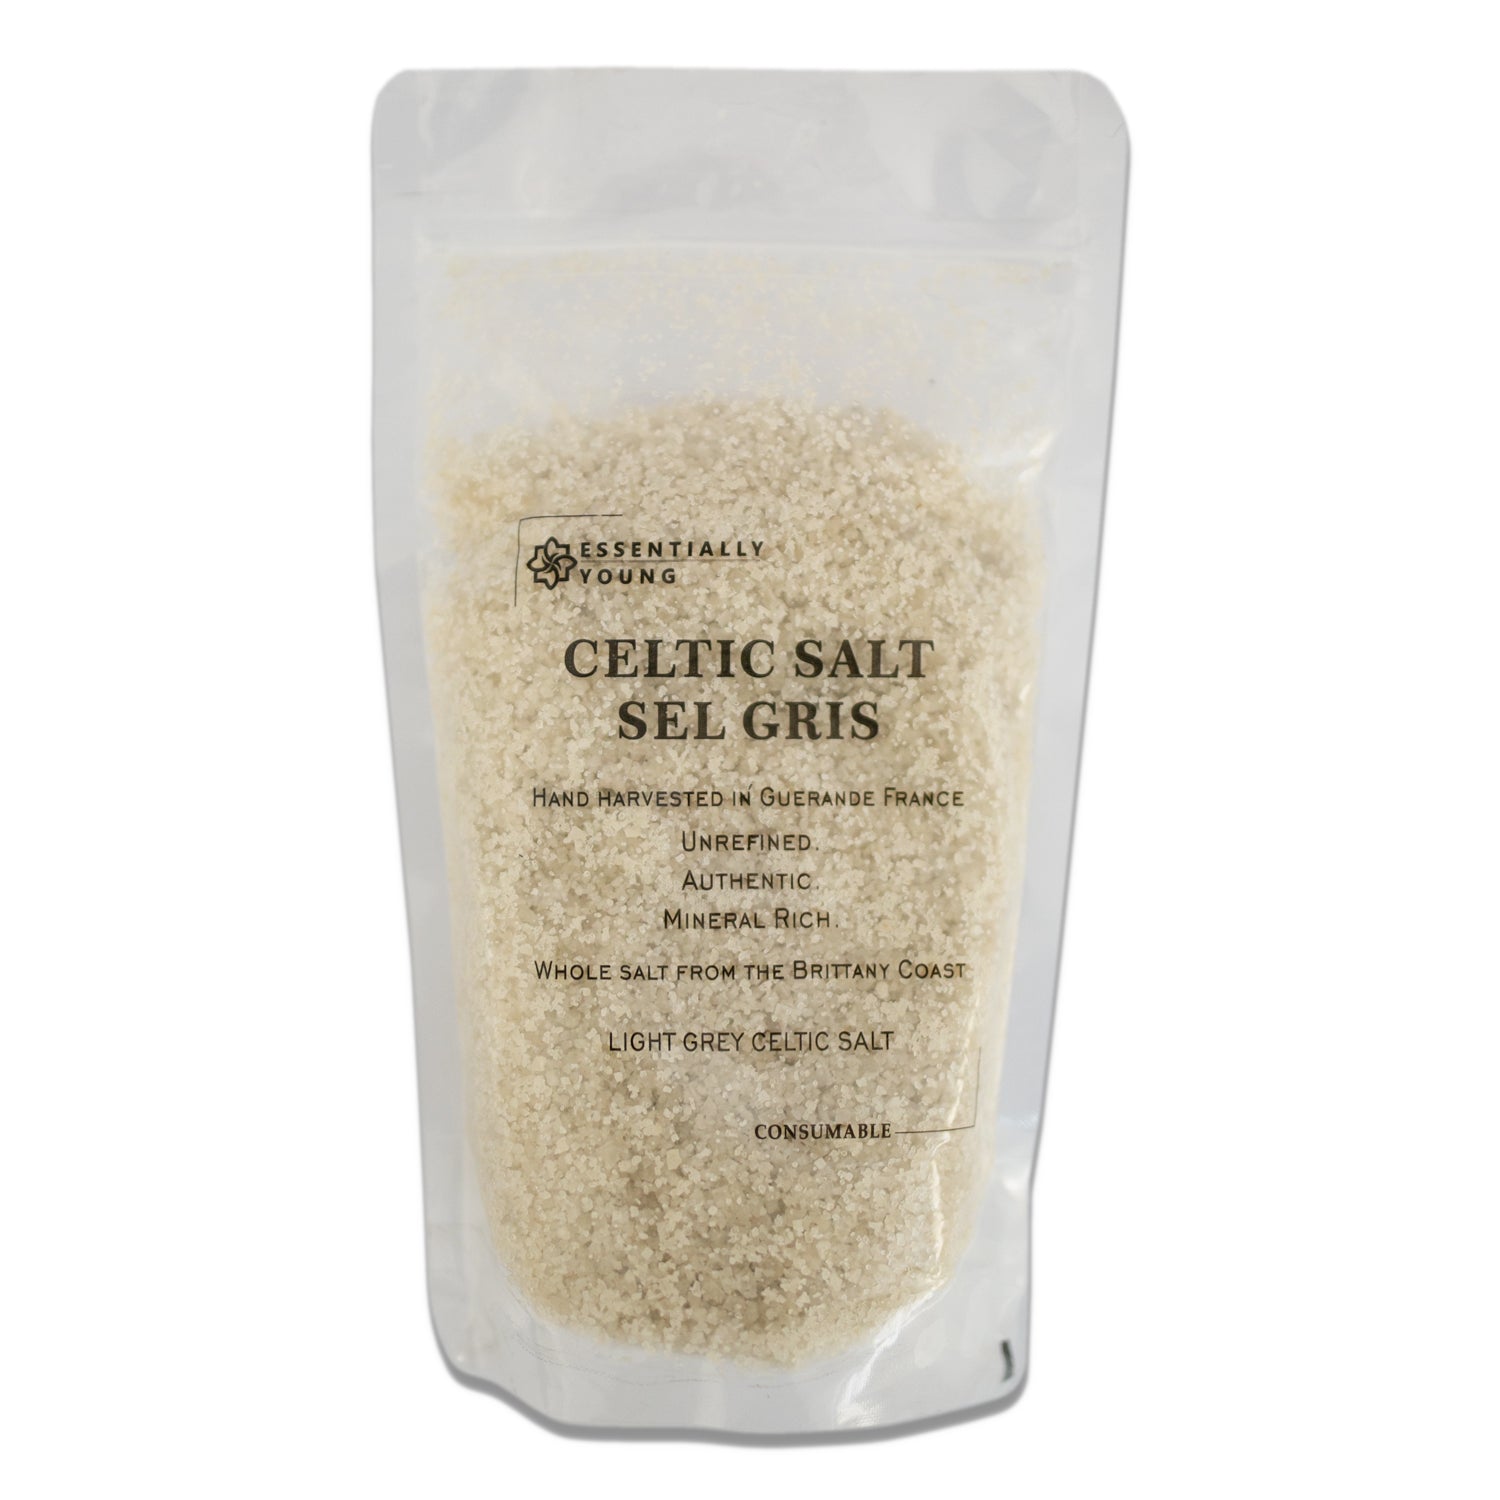 Celtic Salt imported from France - A nutrient-rich alternative to ordinary salt